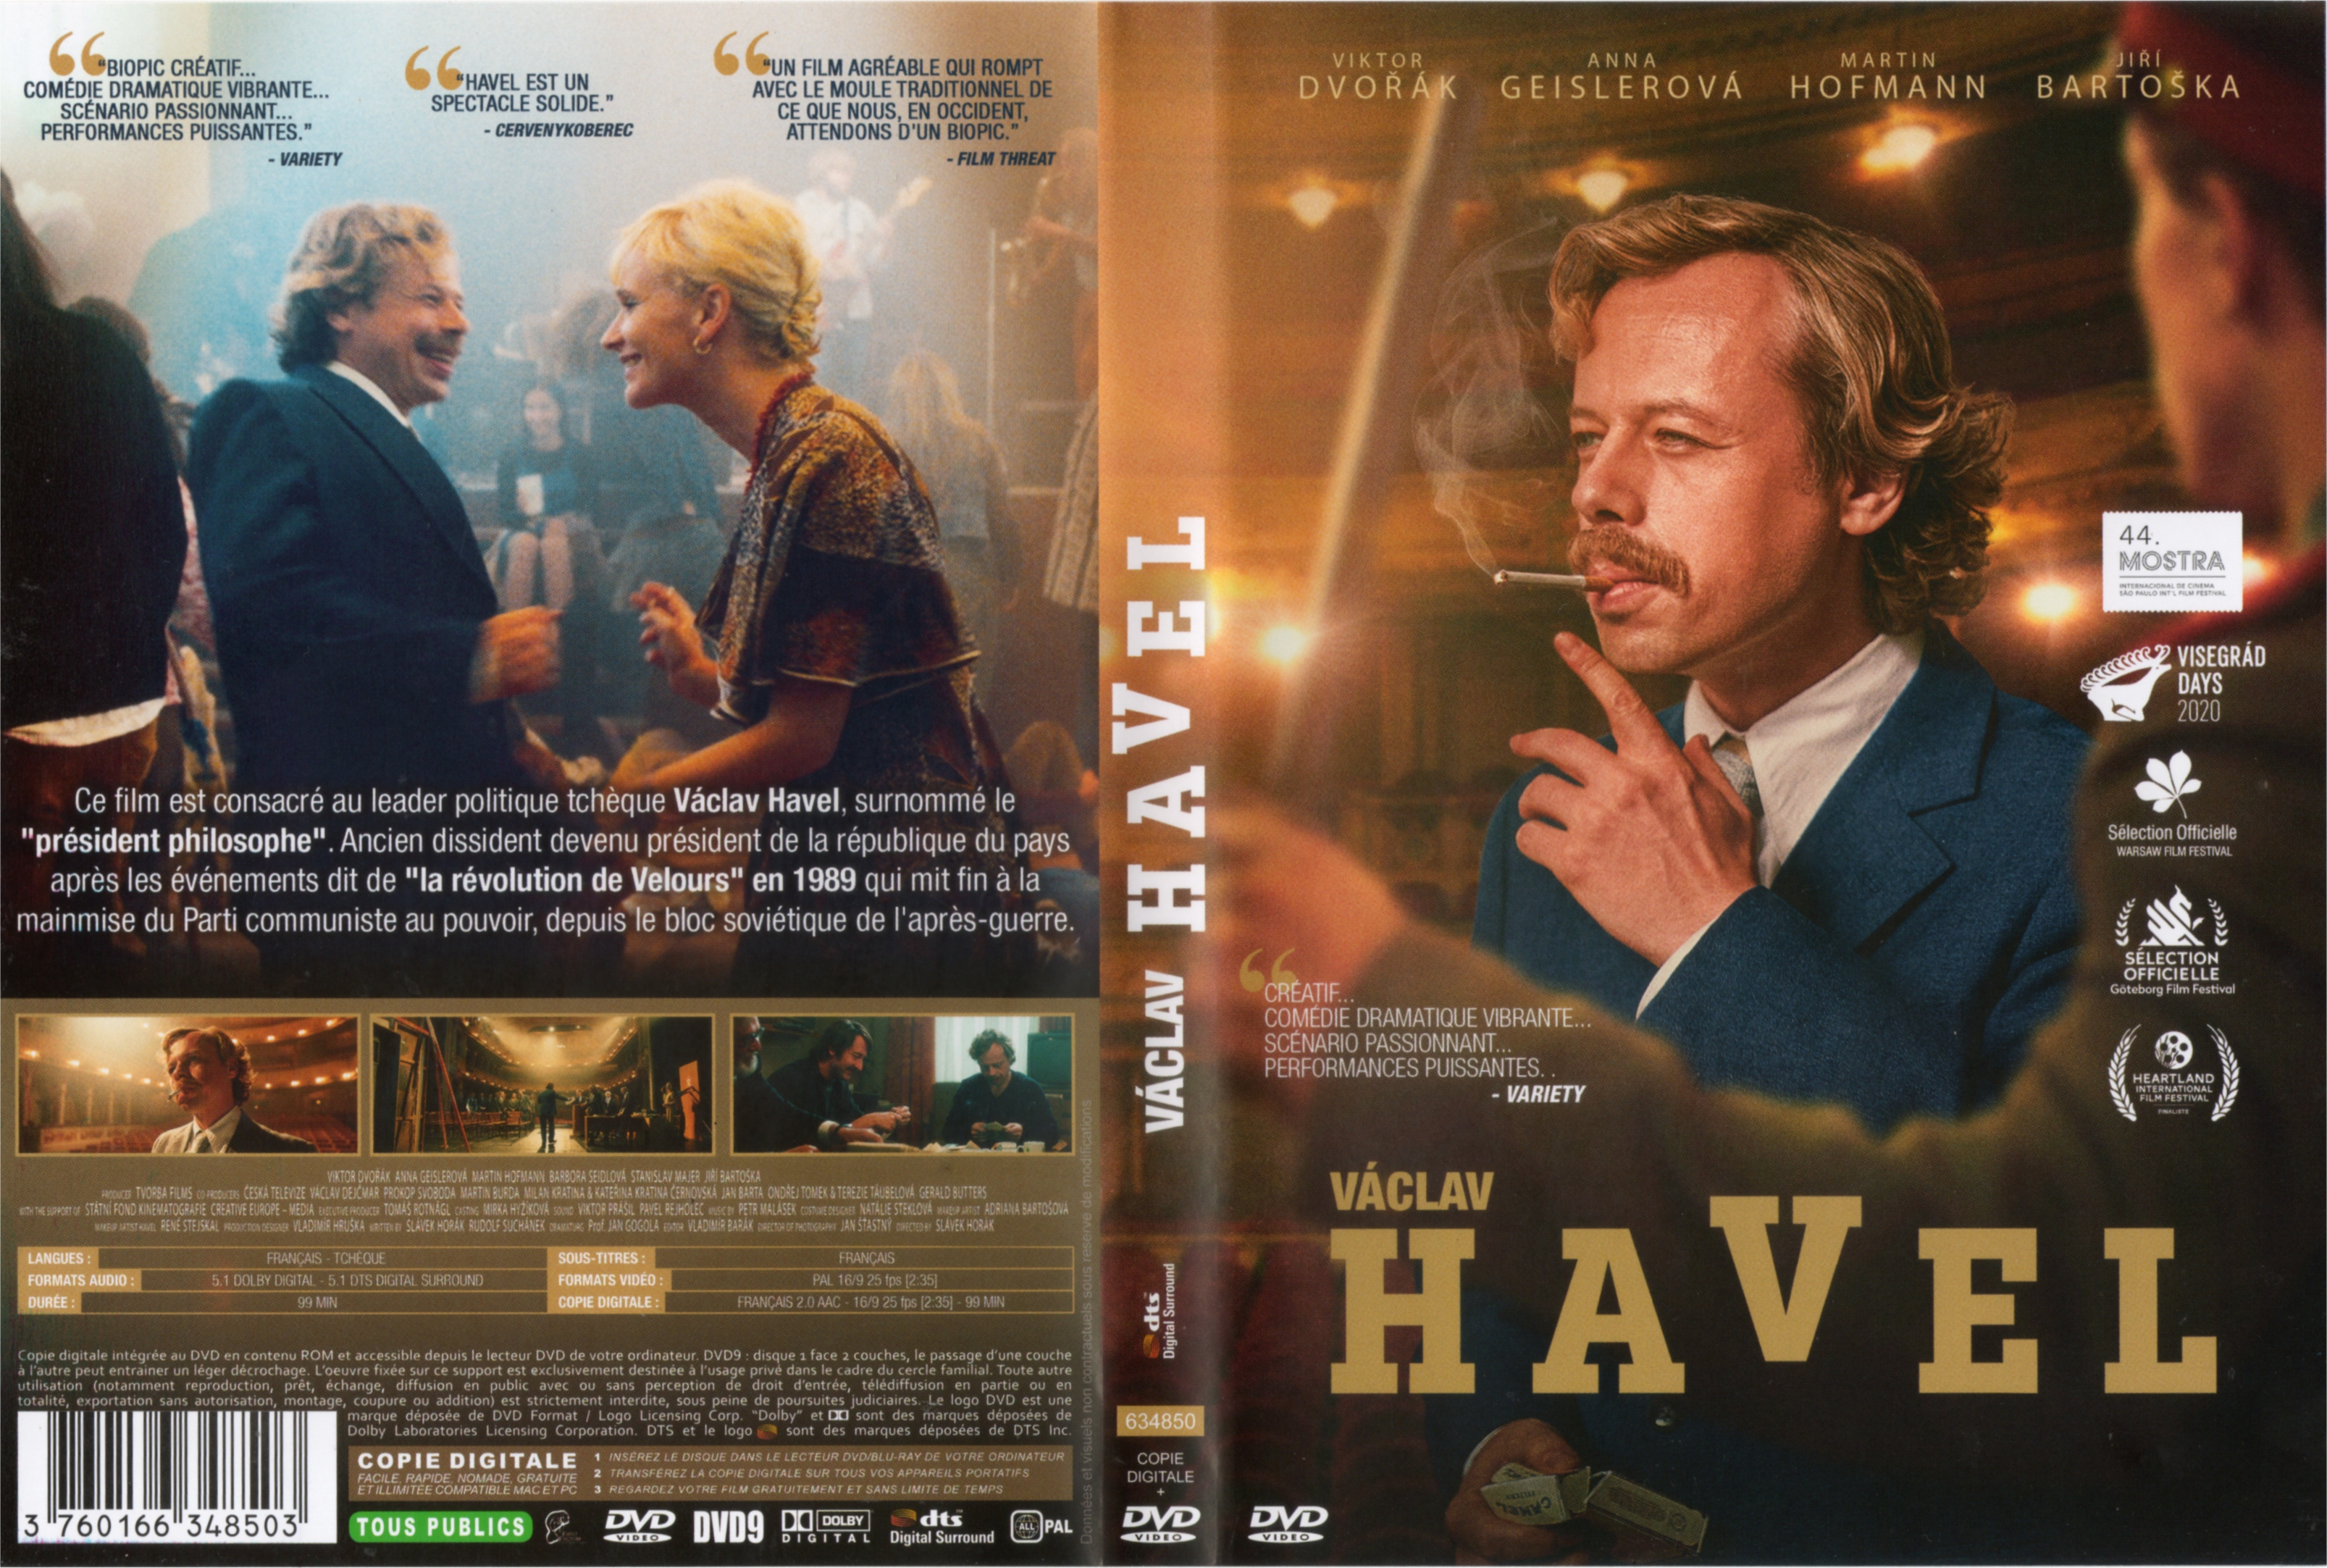 Jaquette DVD Havel (BLU-RAY)